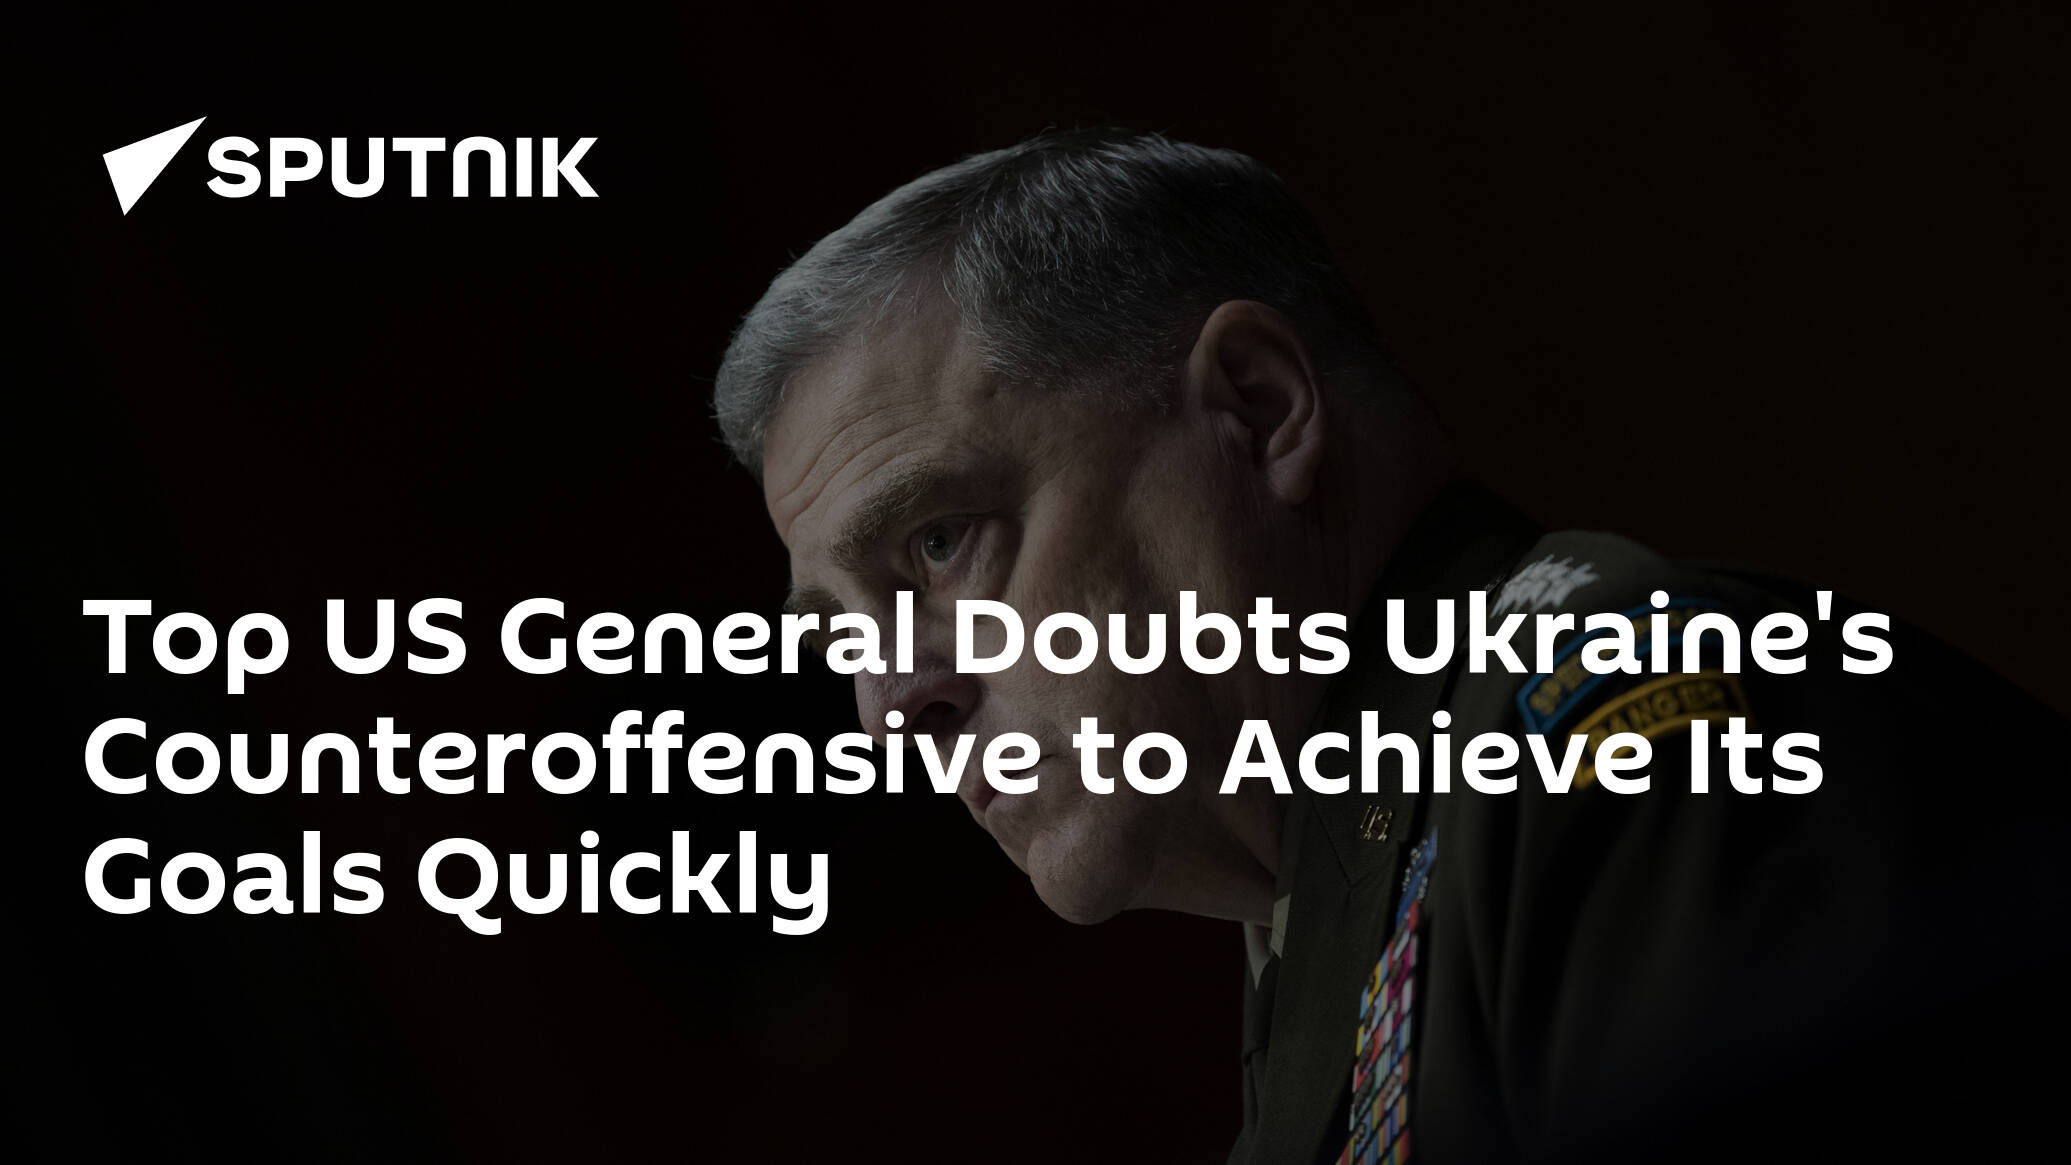 Top US General Doubts Ukraine's Counteroffensive to Achieve Its Goals Quickly